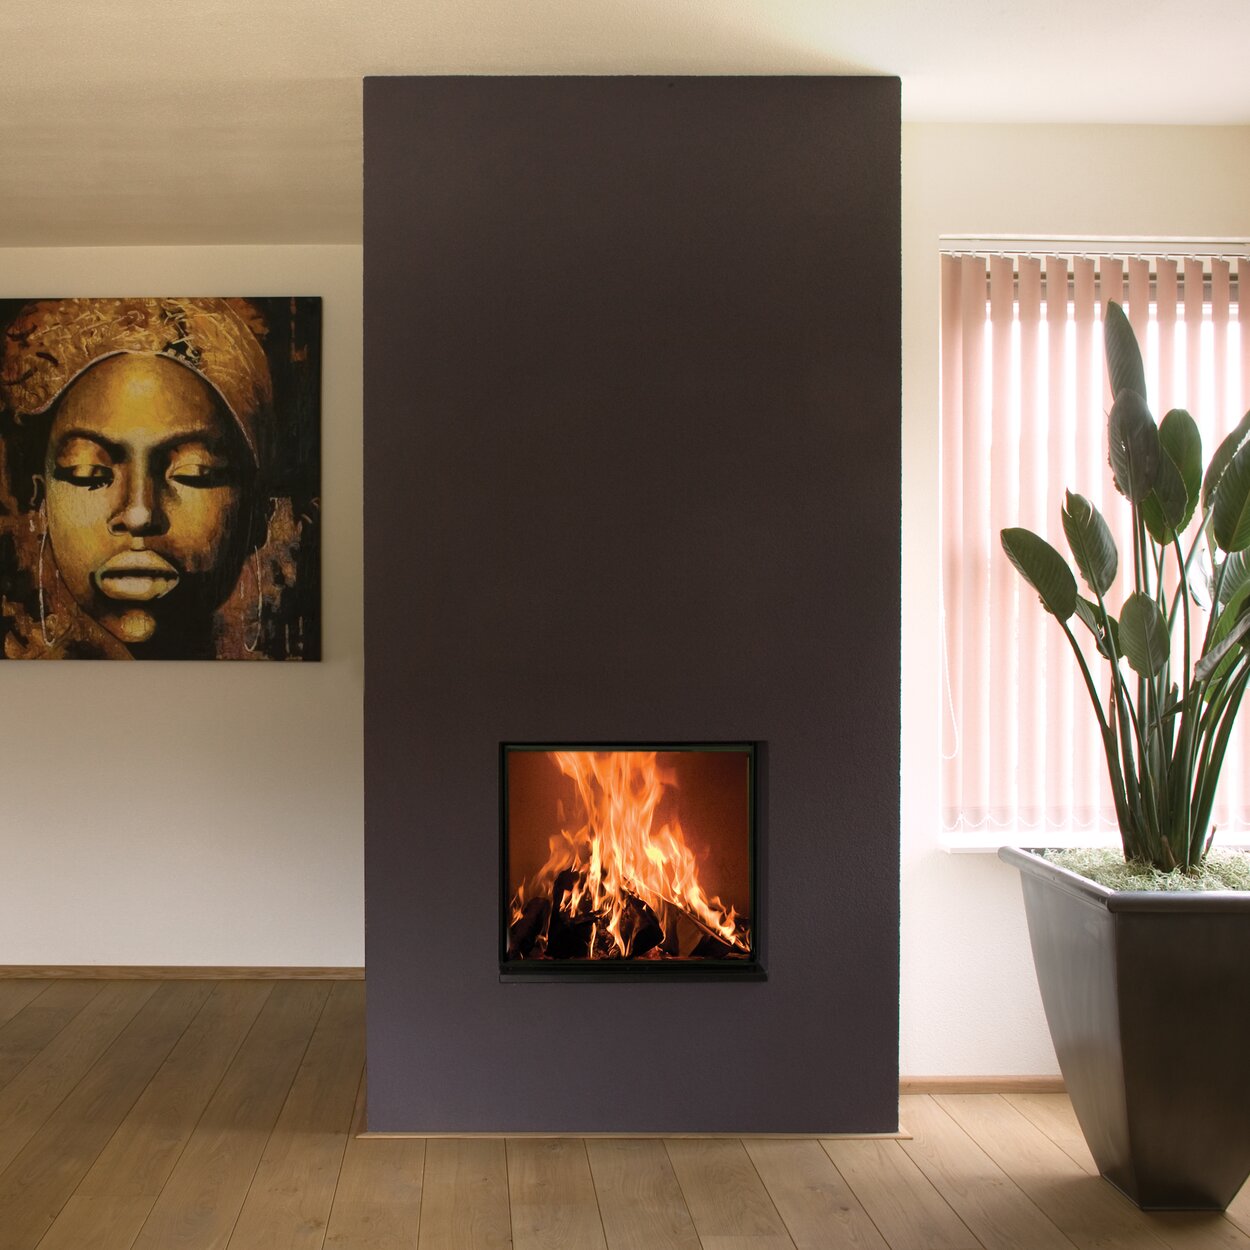 Wood fireplace W60/51F by Kalfire symmetrically installed in a grey-painted wall in a minimalist living room